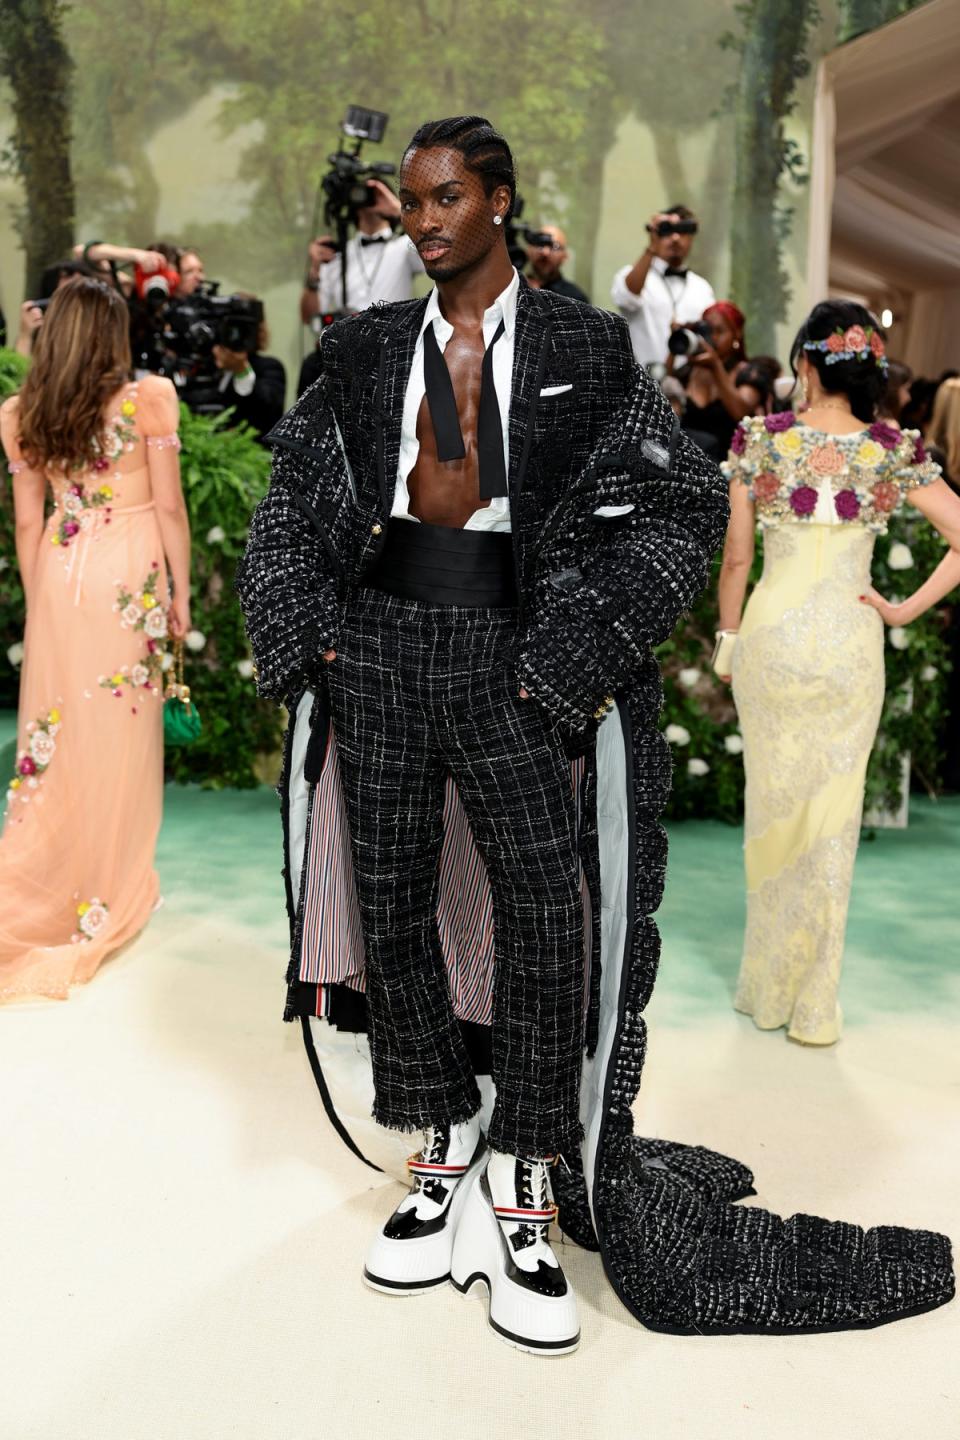 Alton Mason in Thom Browne (Getty Images for The Met Museum/)